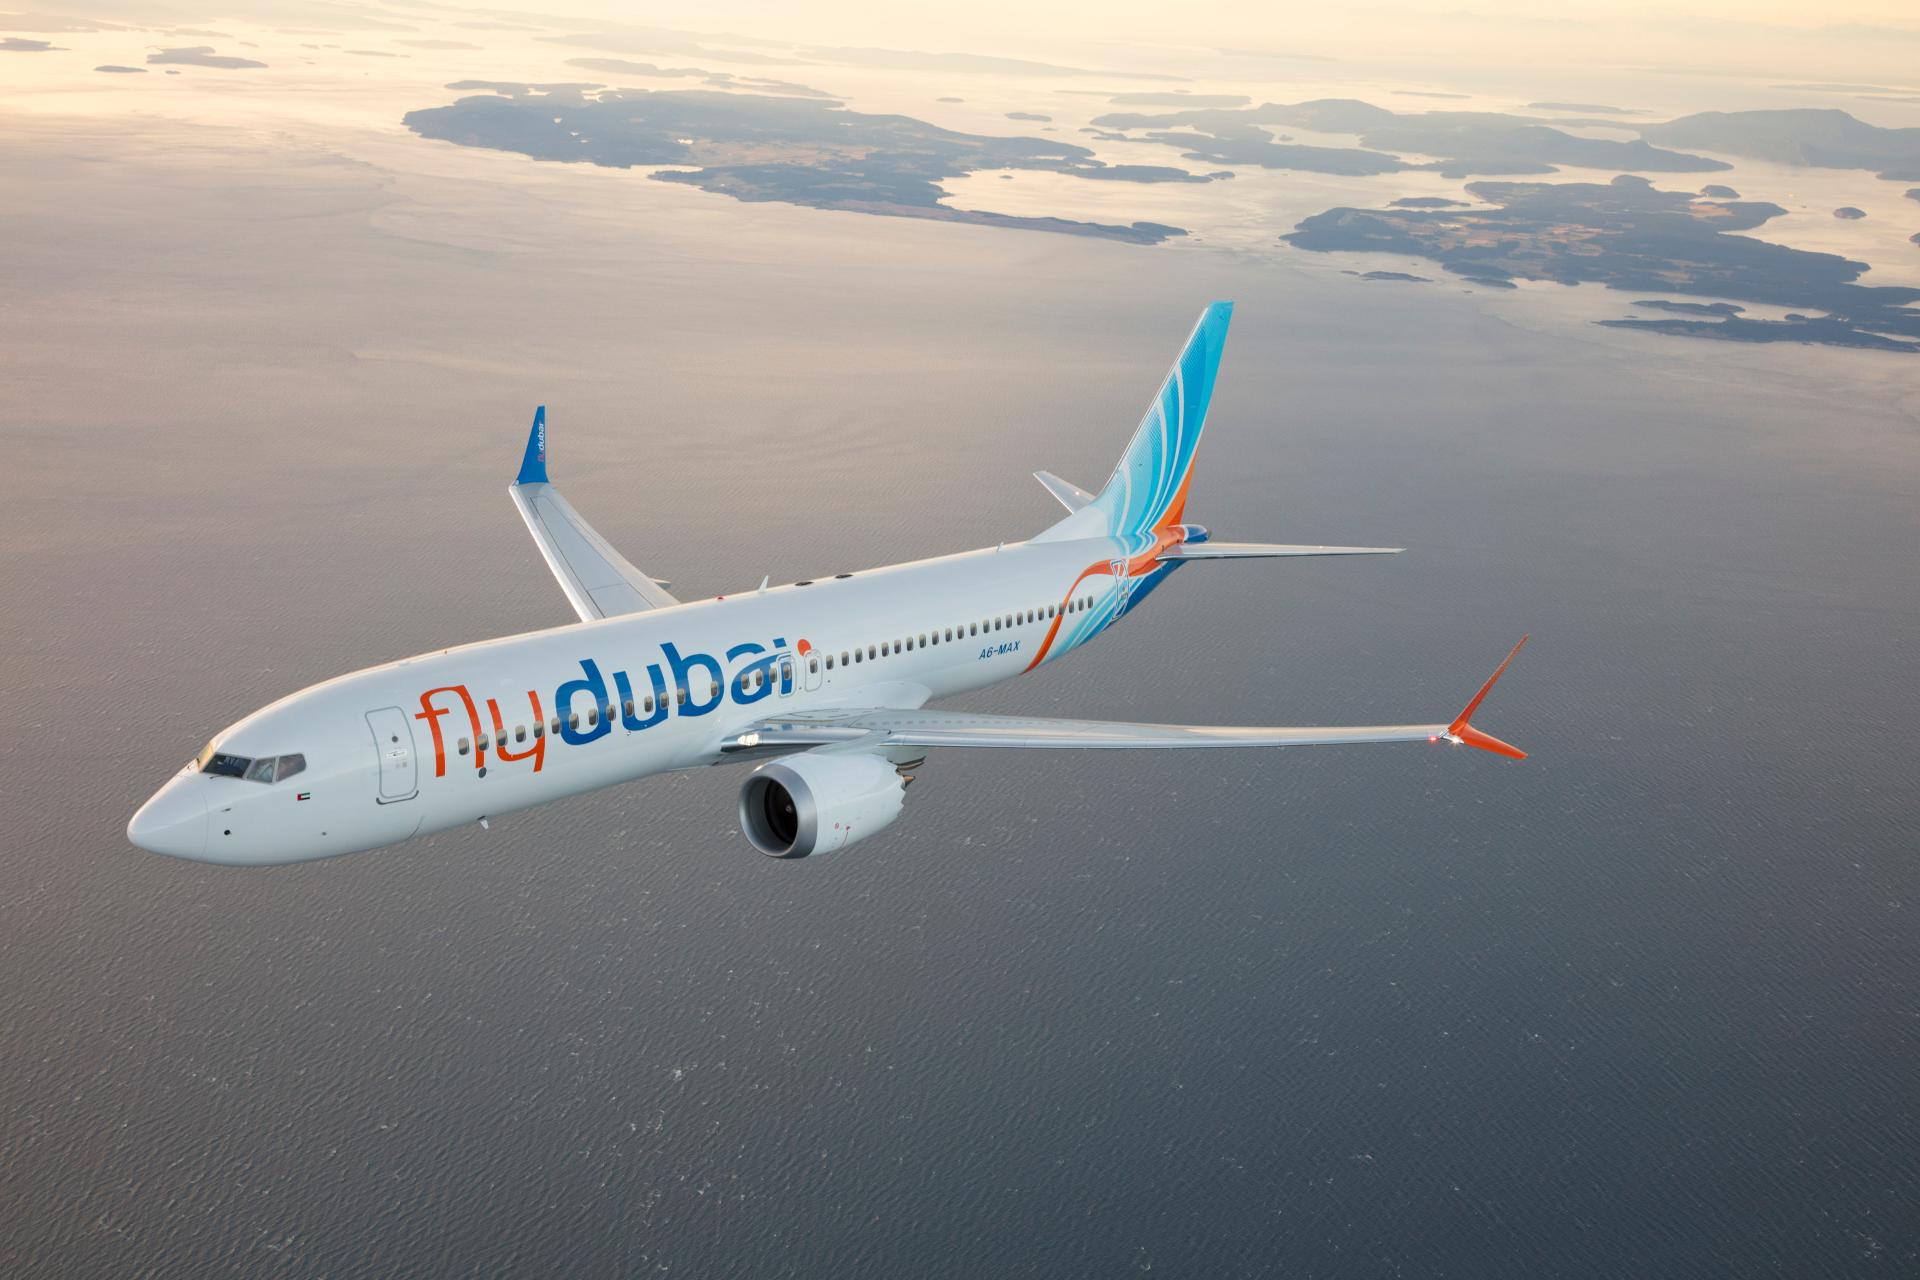 Flydubai was one of the few carriers that resumed flying over Iranian airspace.